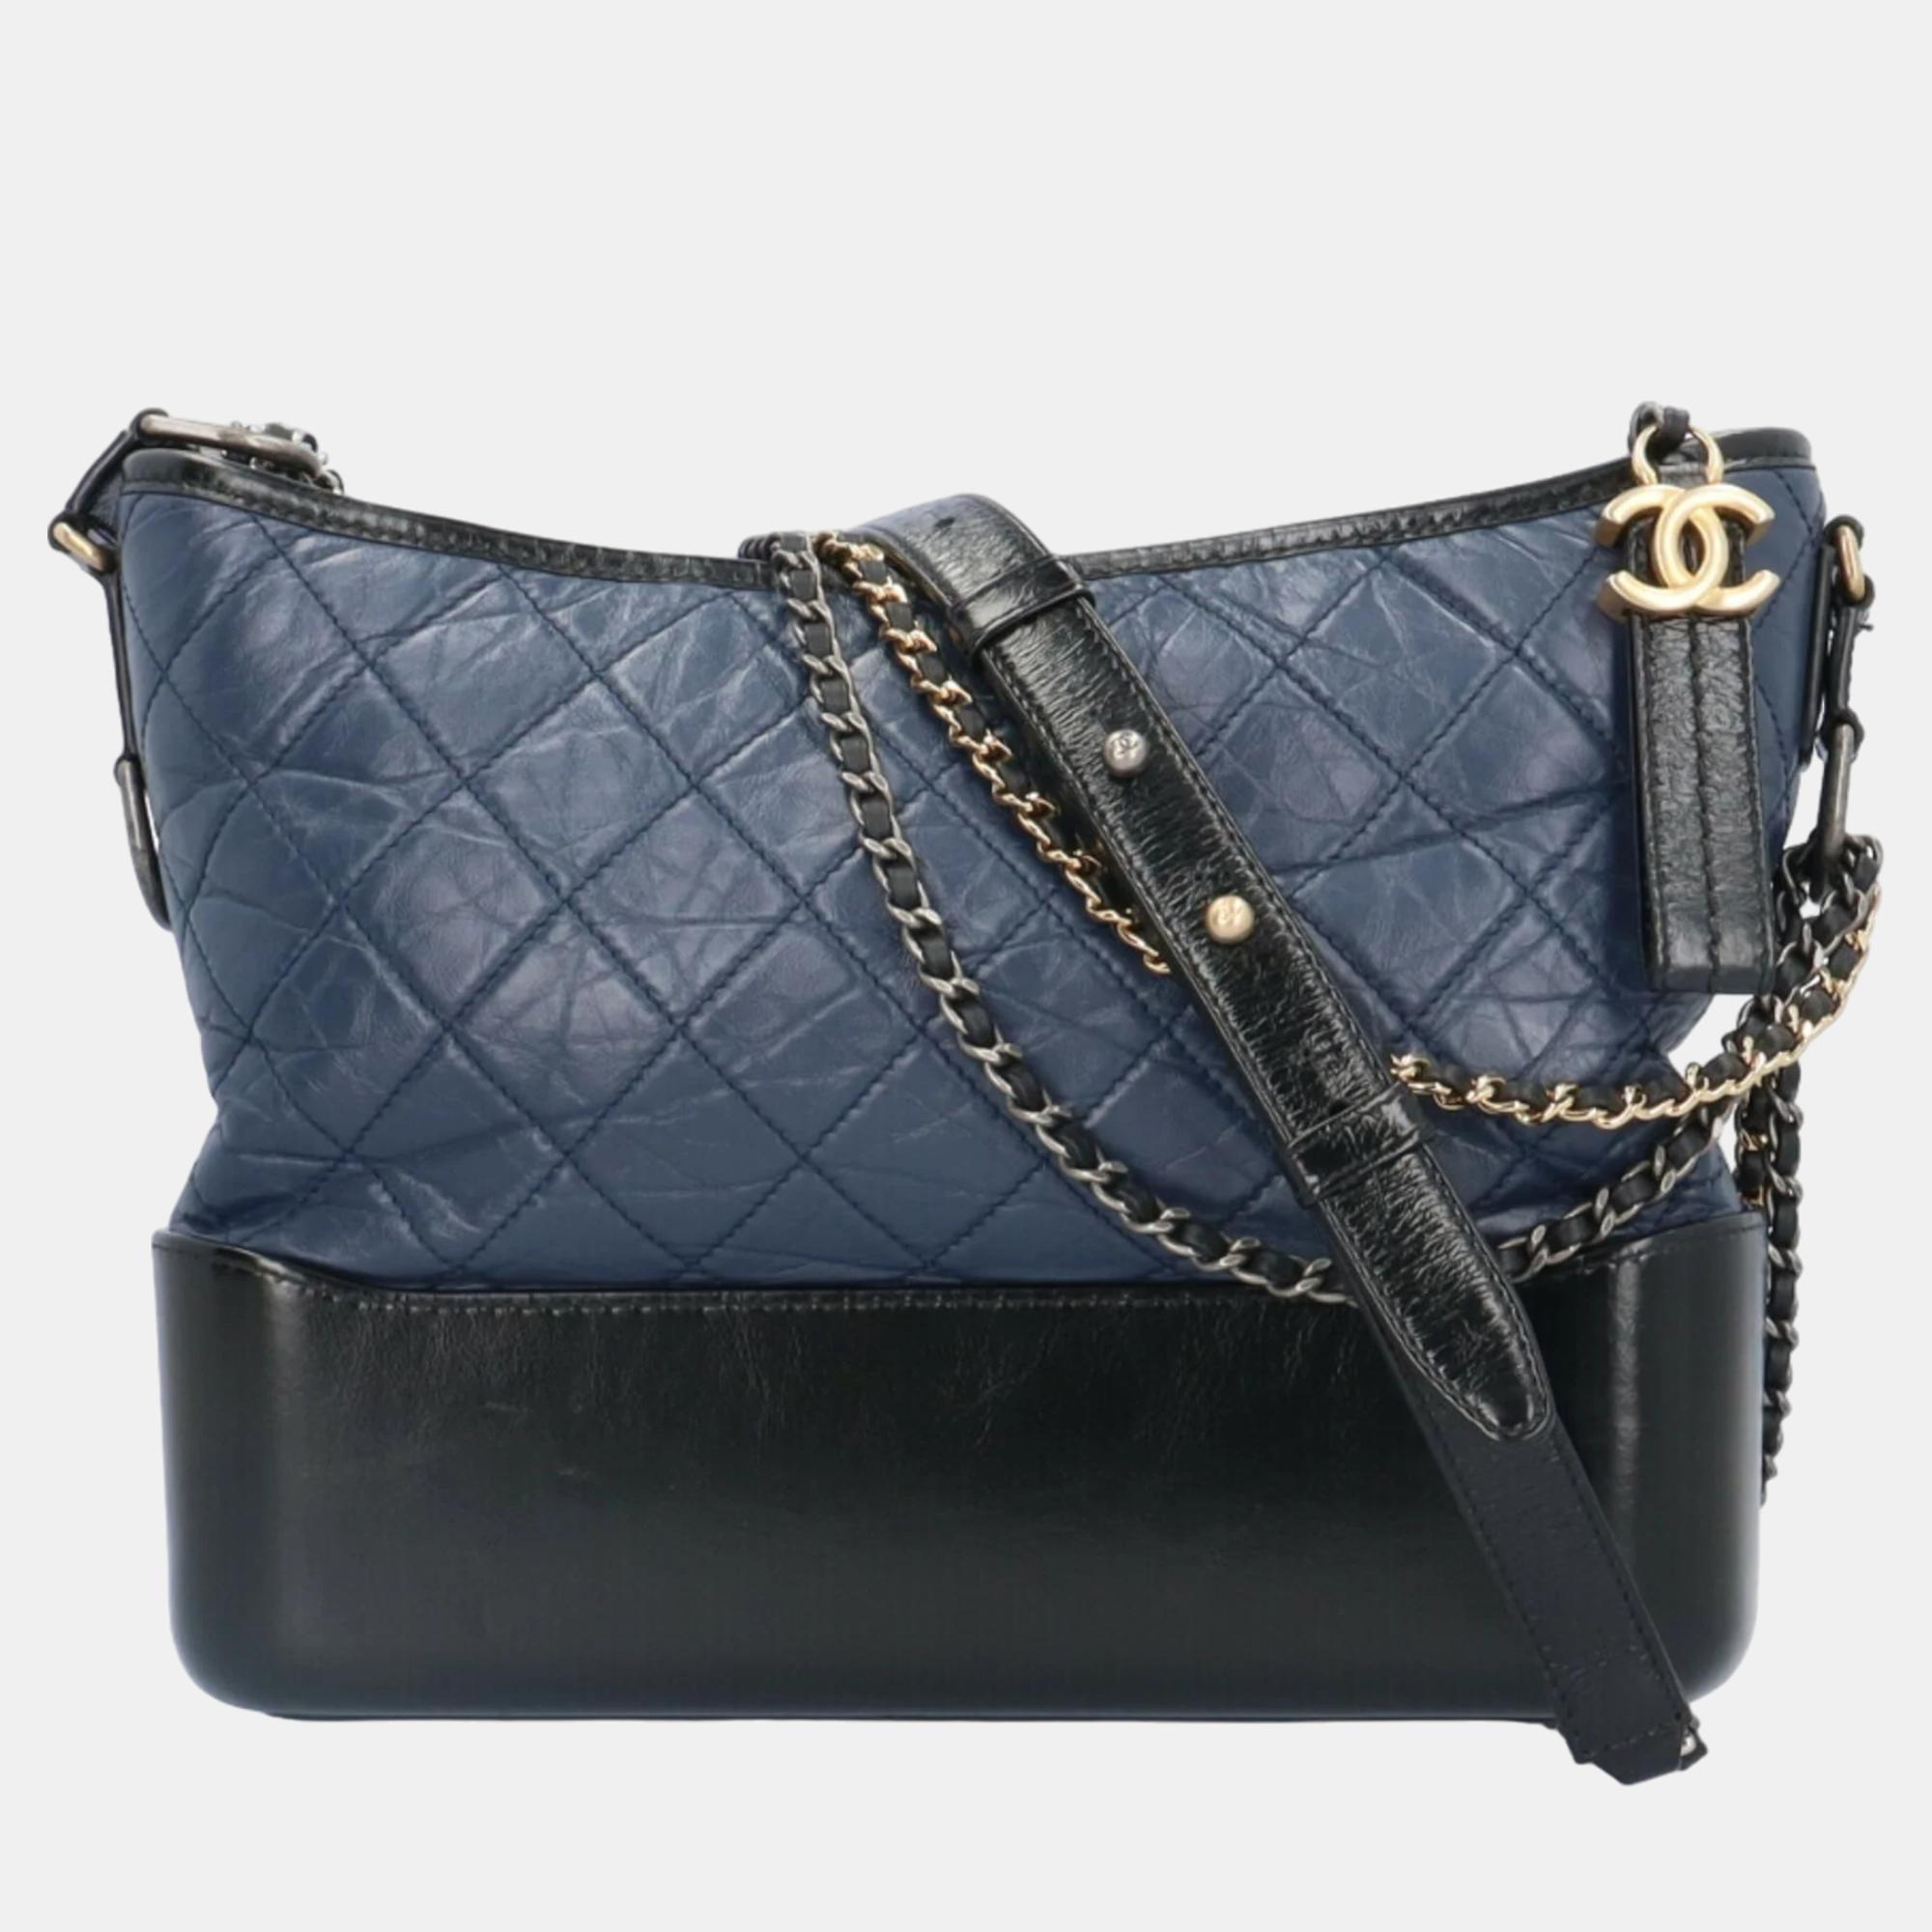 Chanel navy blue leather large gabrielle hobo bag